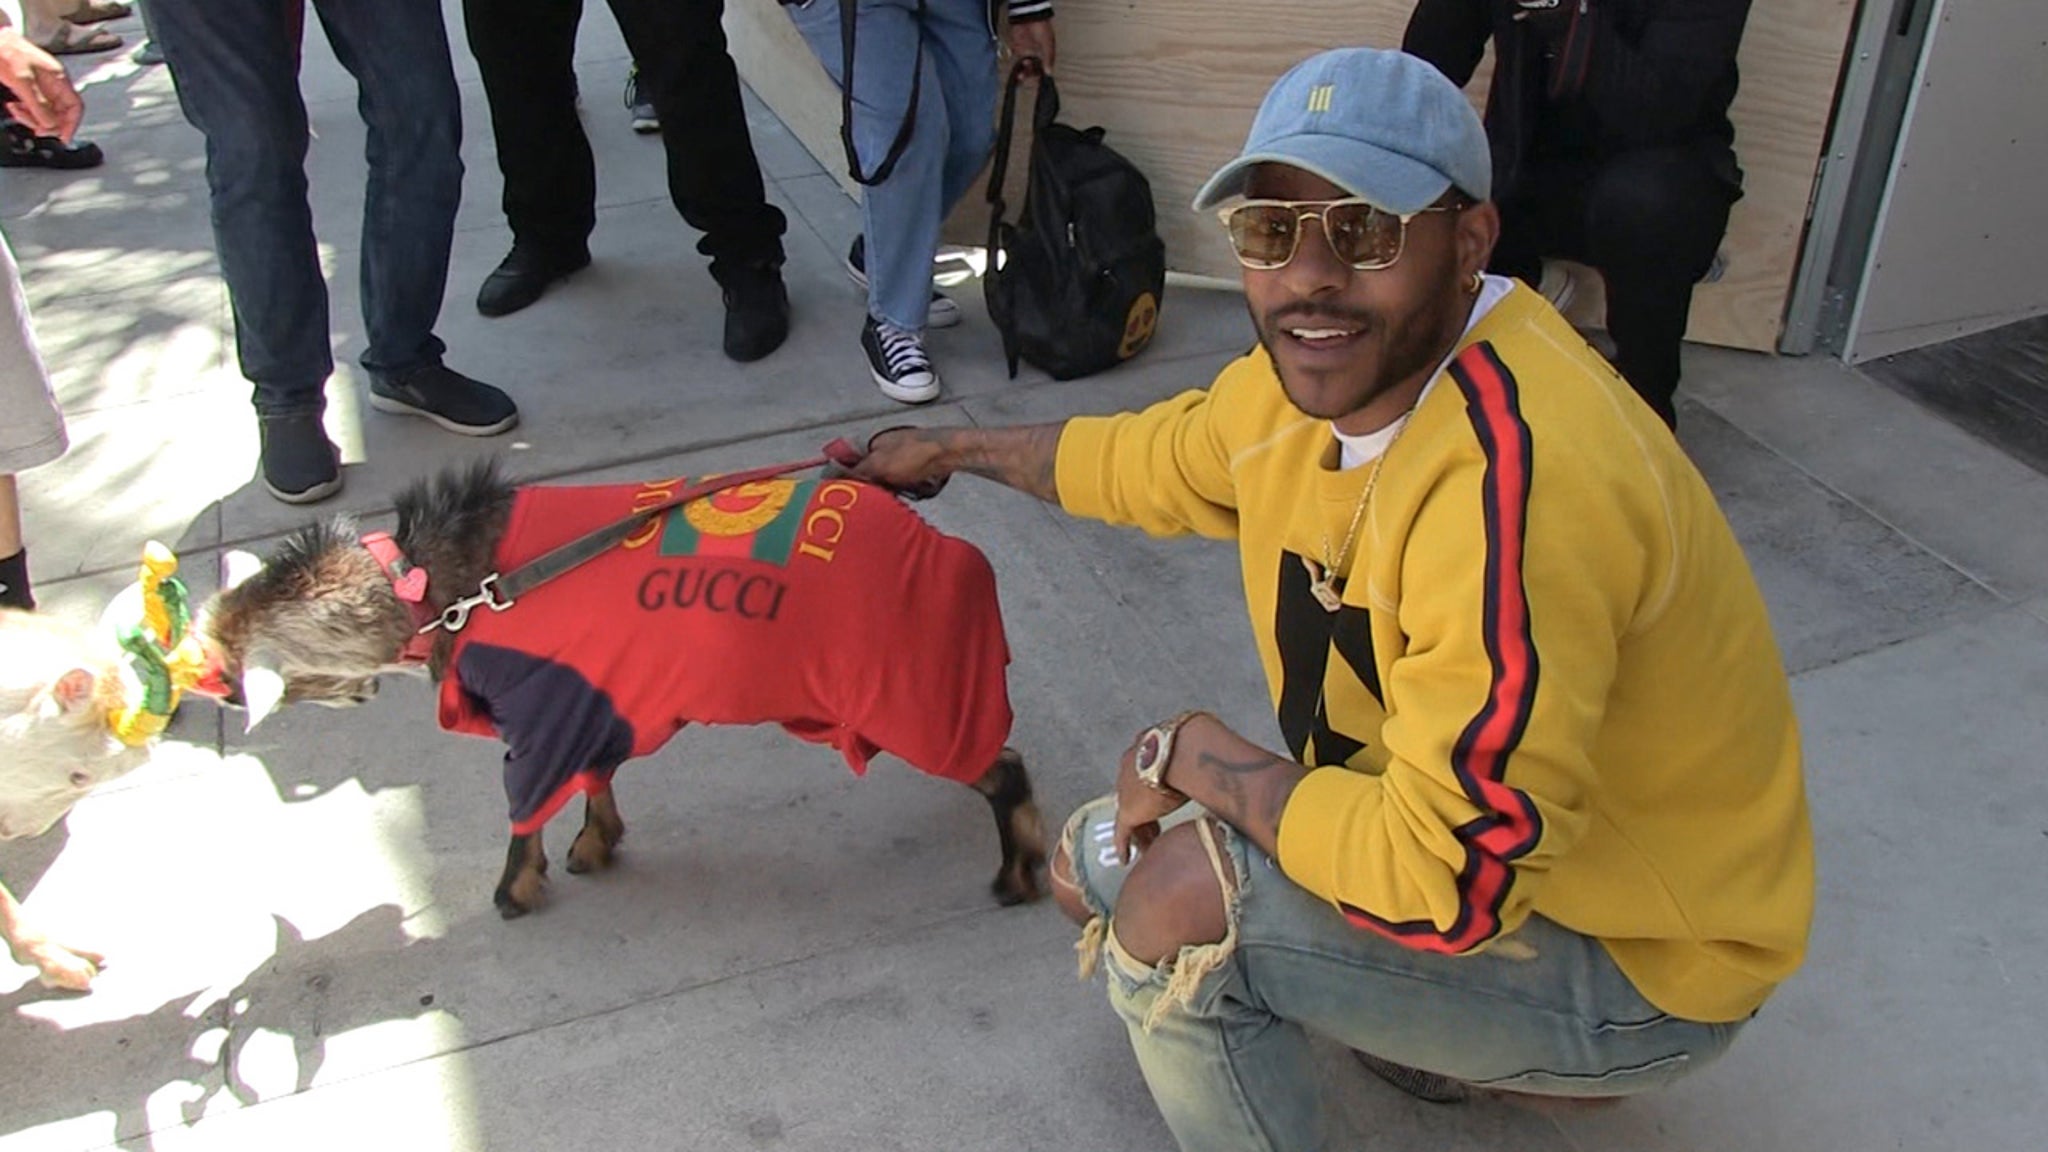 Eric Bellinger's Pet Goats Butt While Wearing Gucci